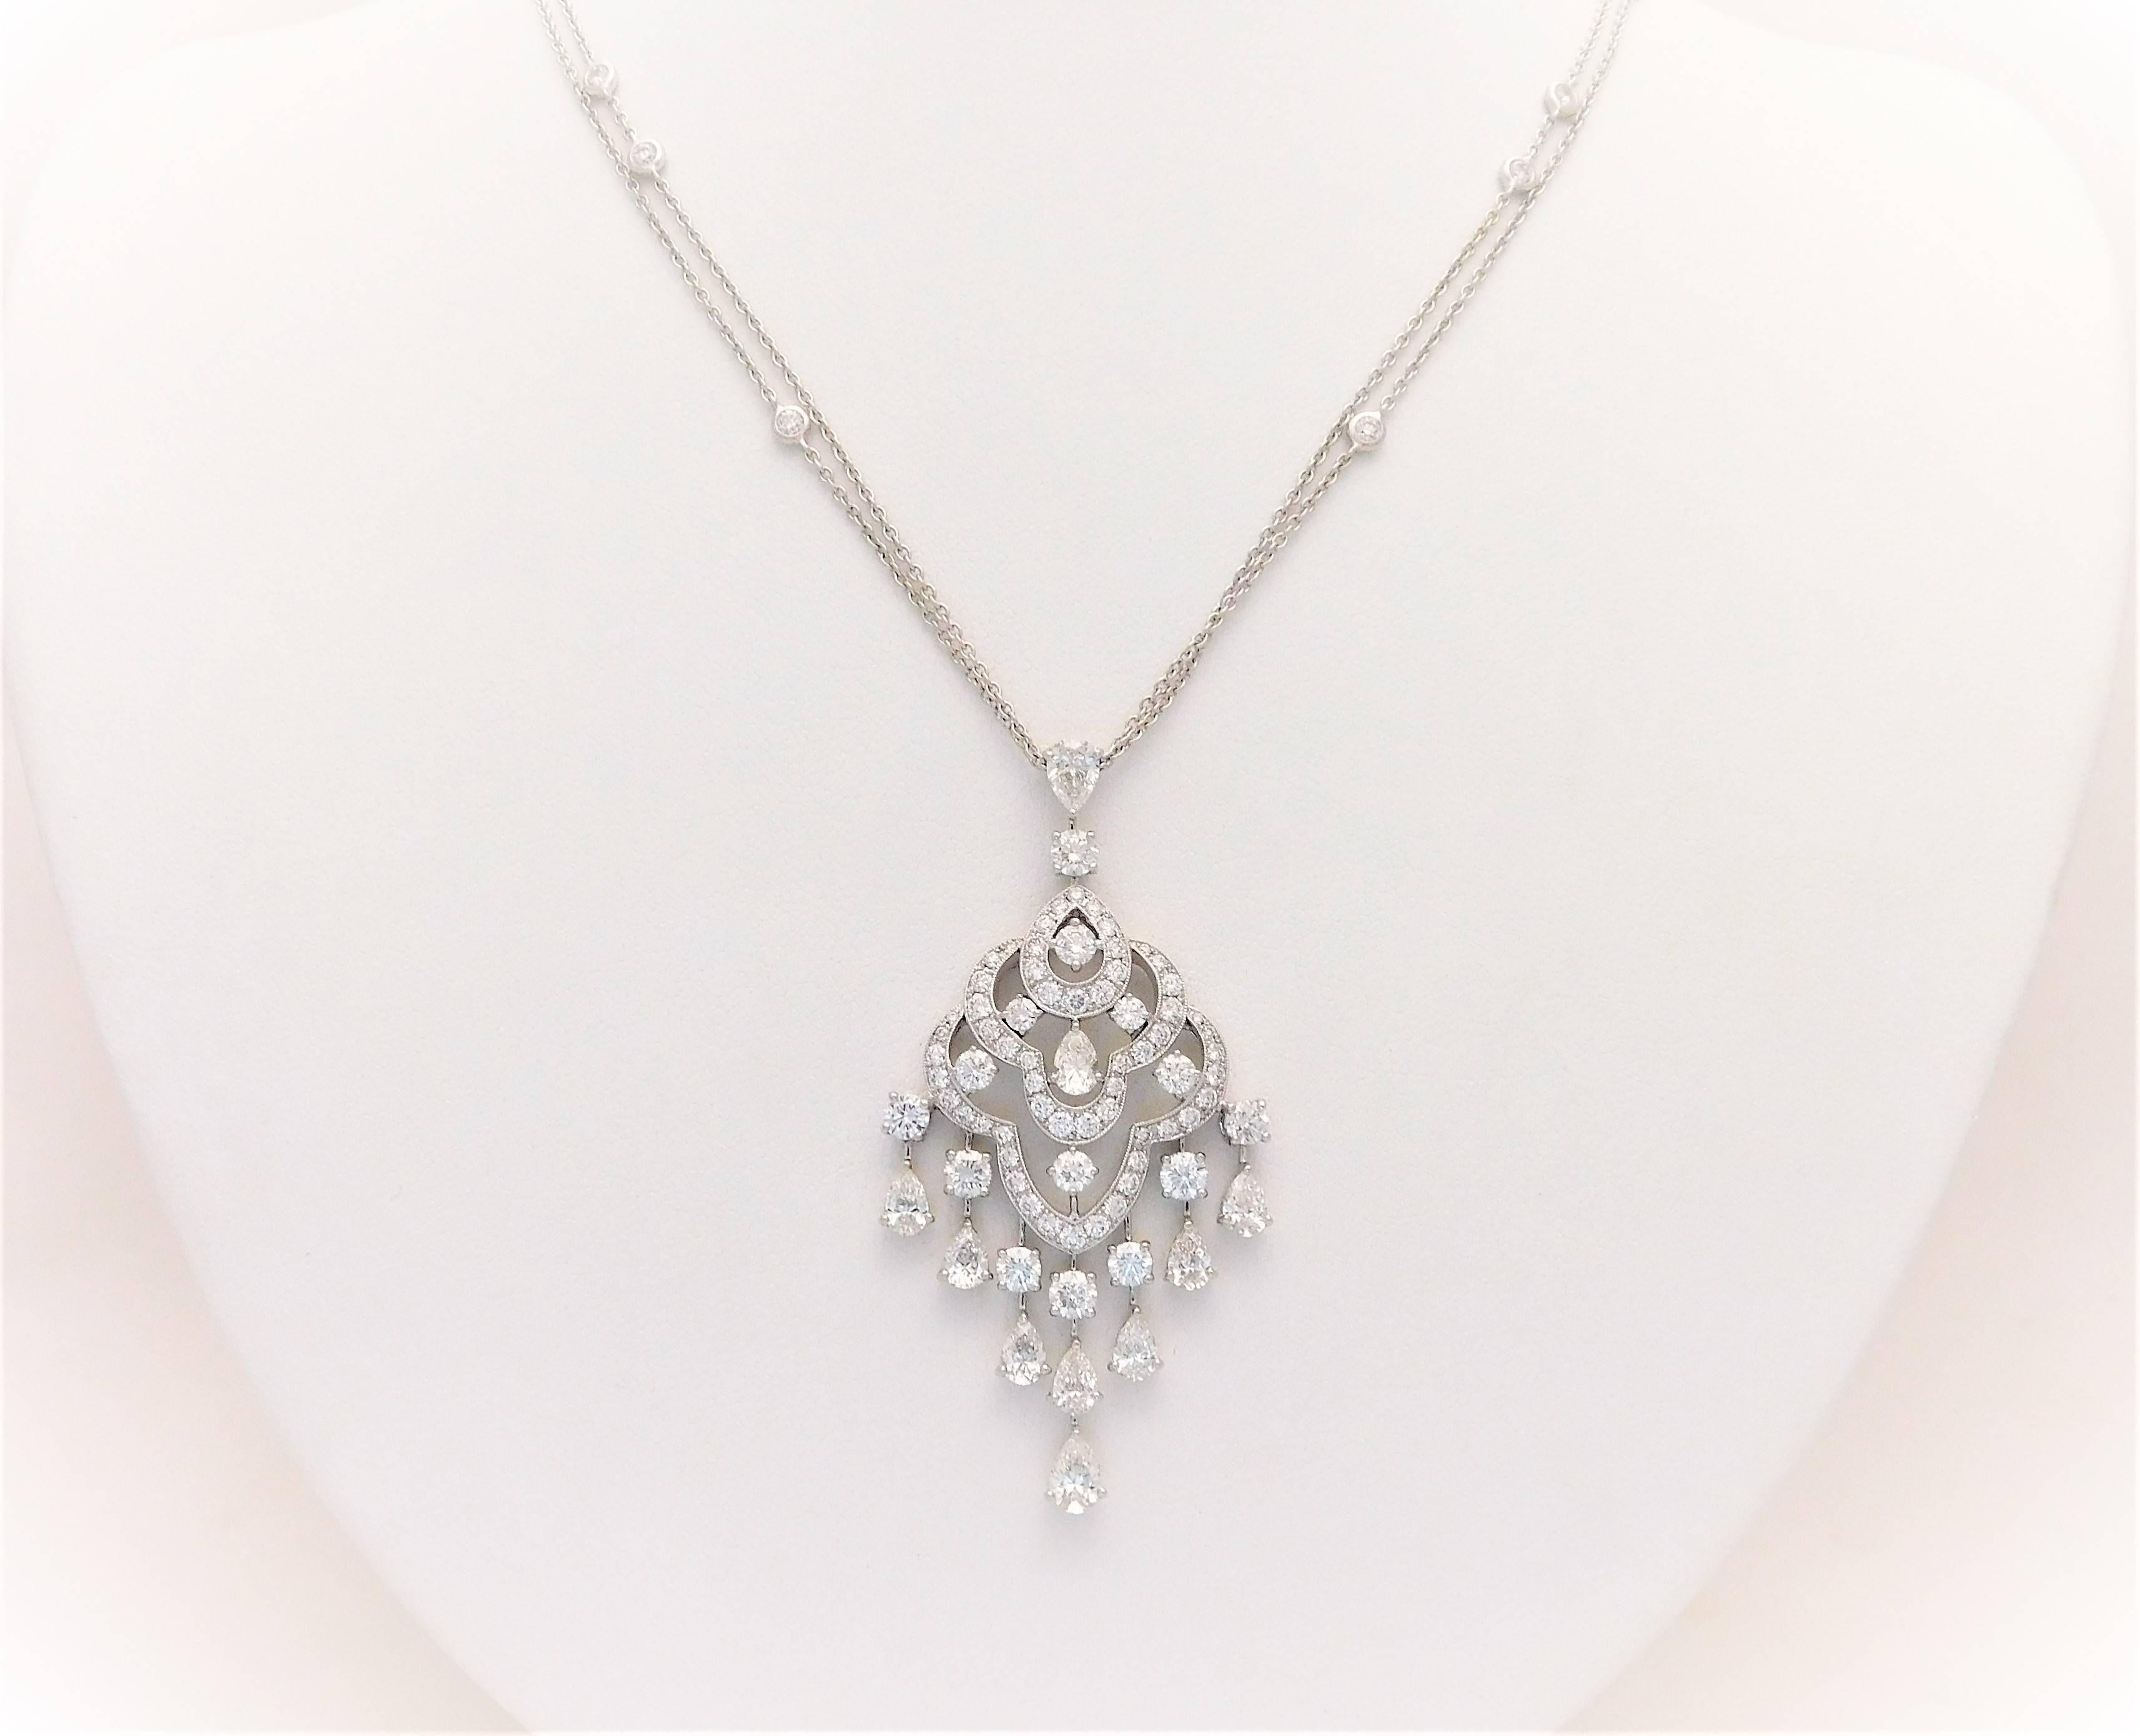 6.35 Carat Double Strand 18 Karat White Gold Diamond Chandelier Necklace In New Condition For Sale In Metairie, LA